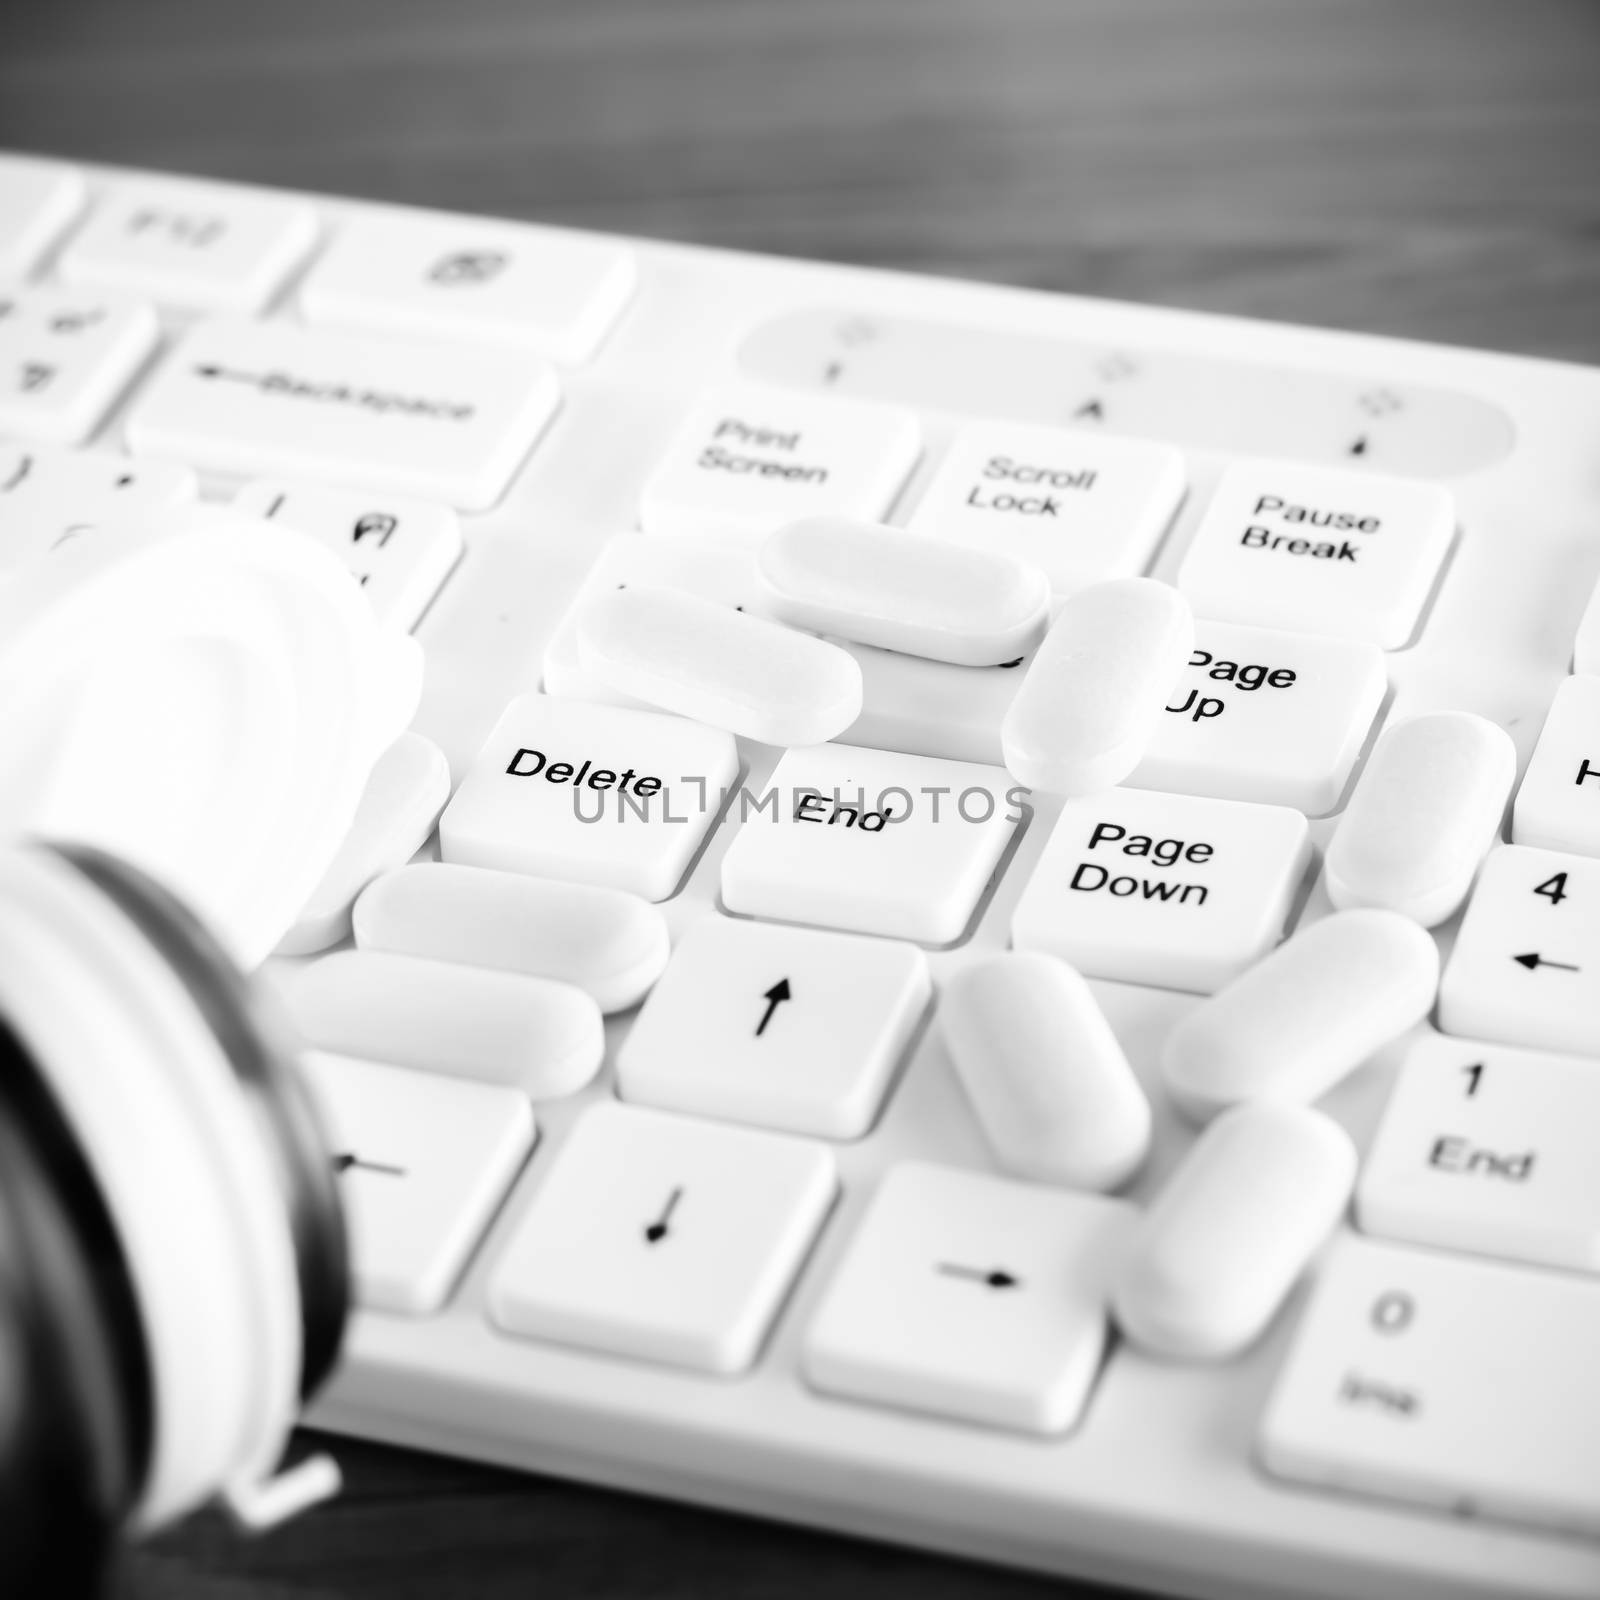 pills on keyboard computer on wooden background concept technology addiction black and white color tone style